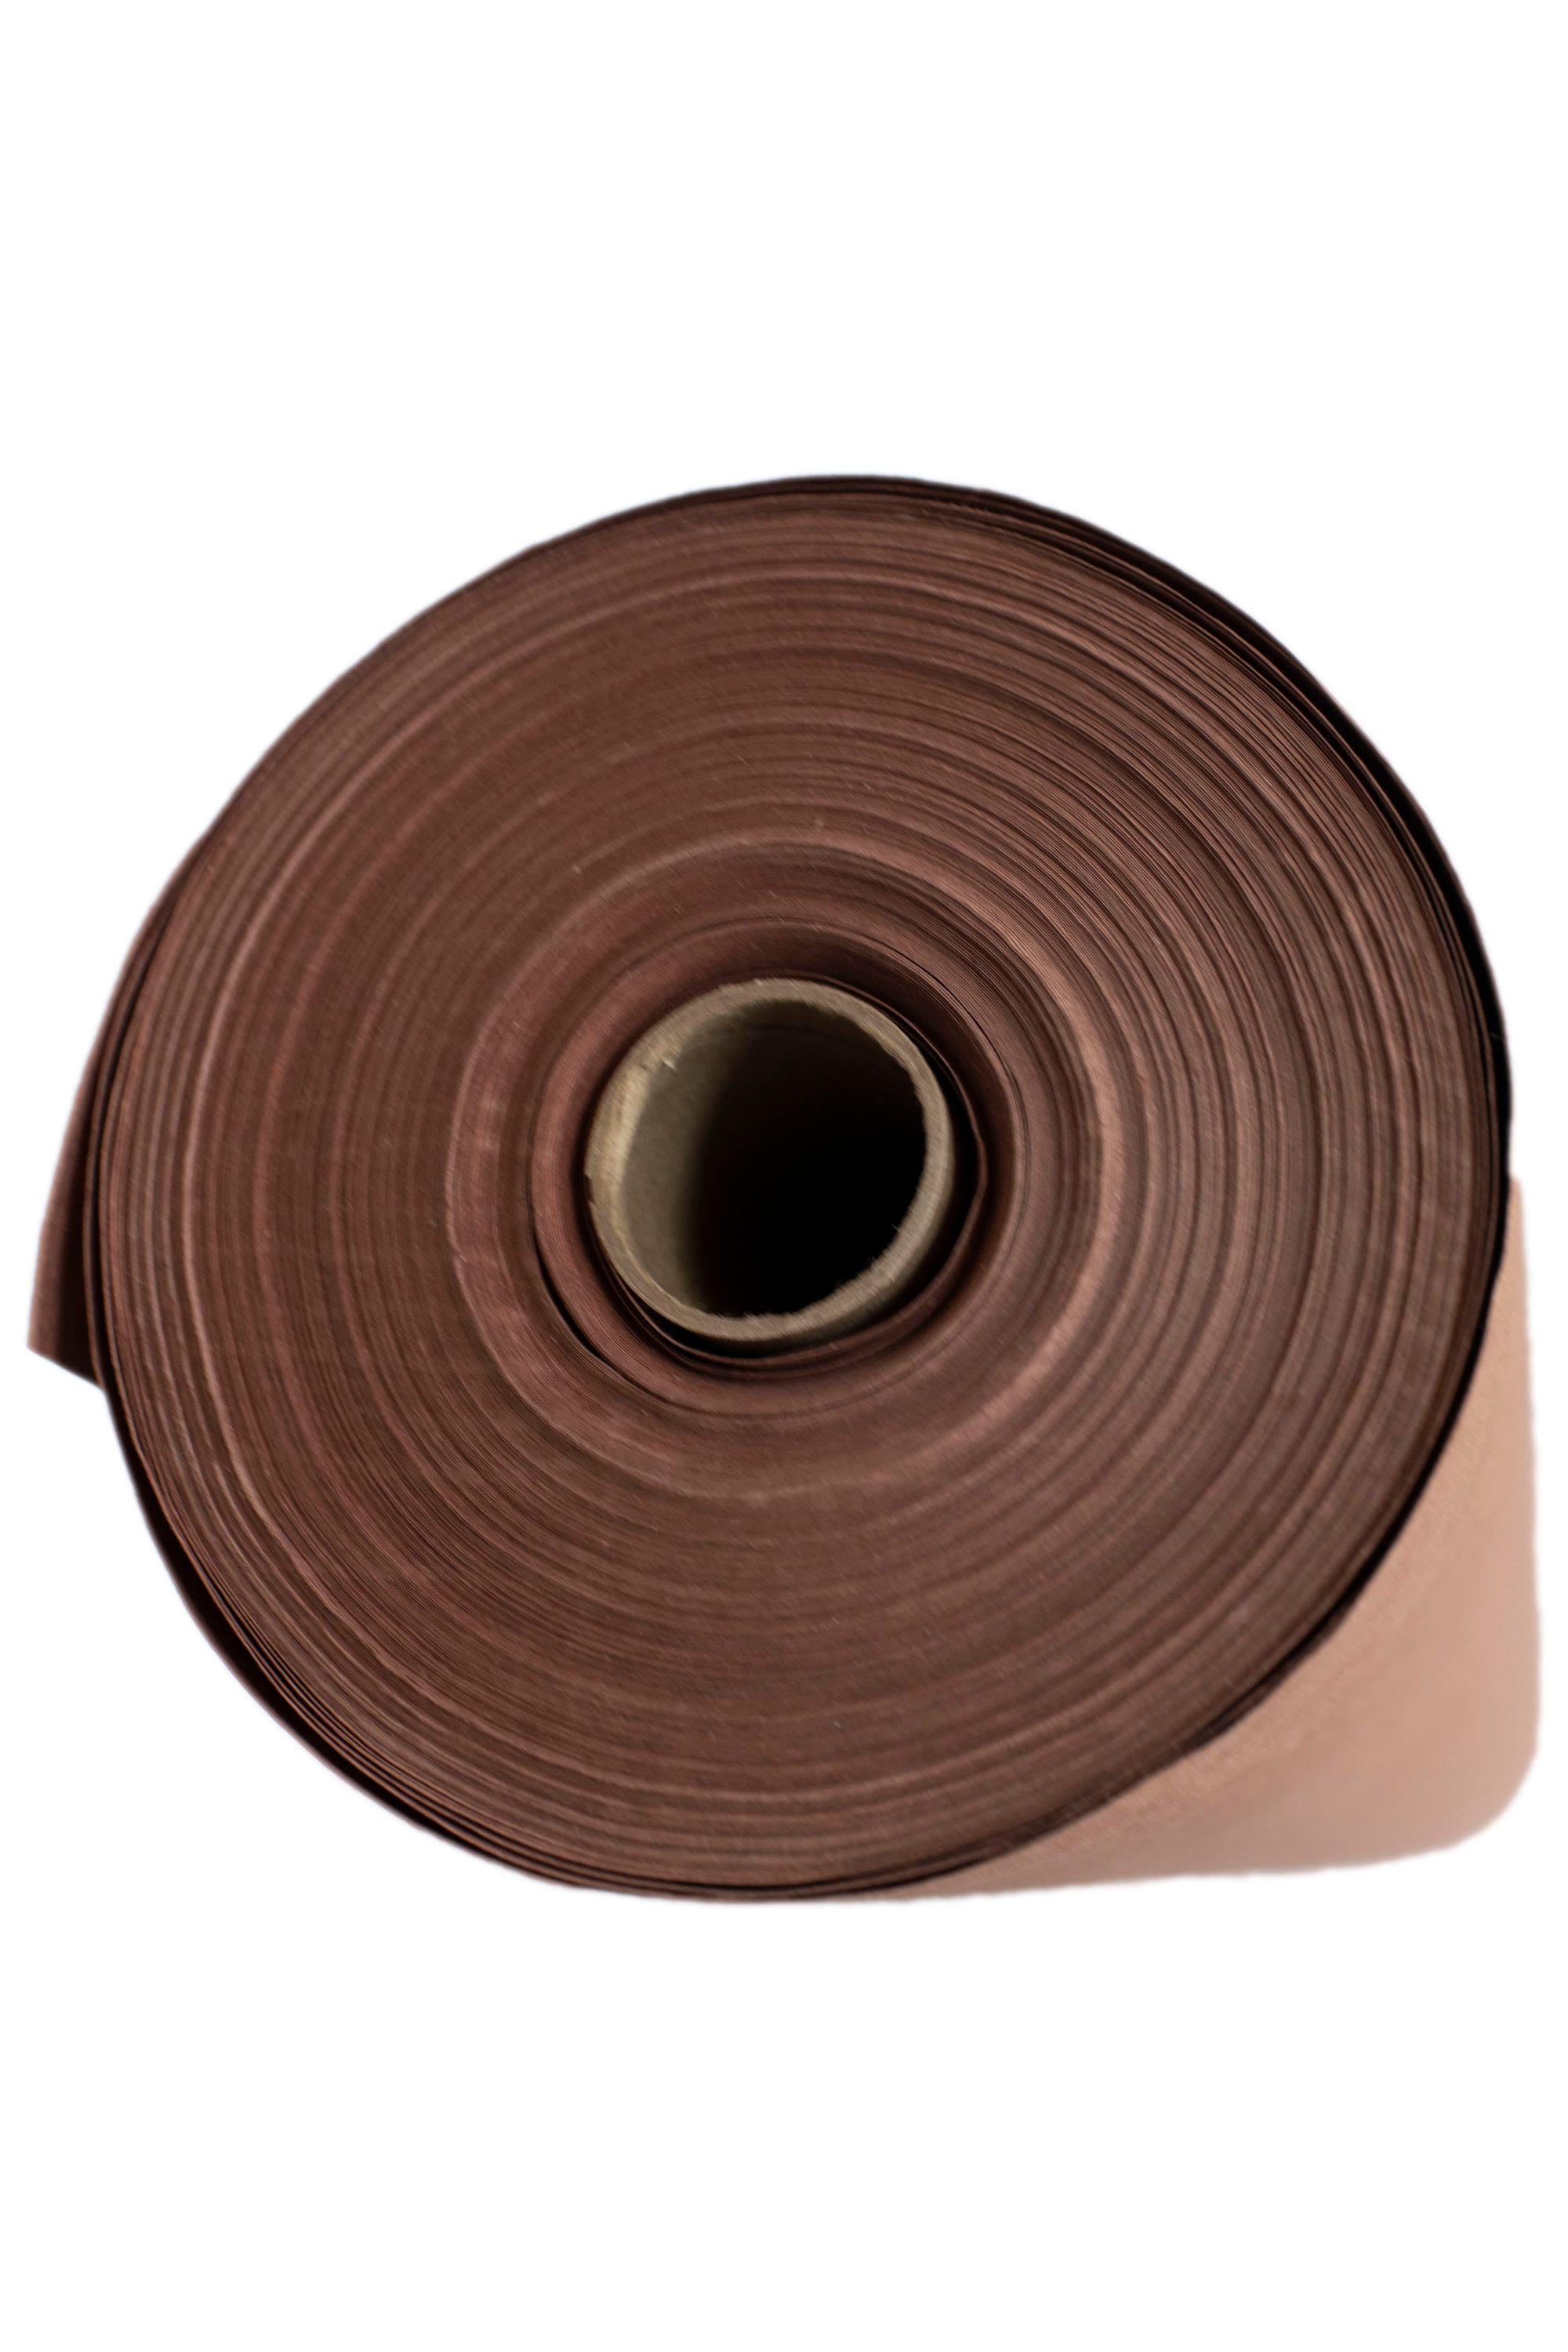 36-Inch X 167-Foot Red Rosin Paper